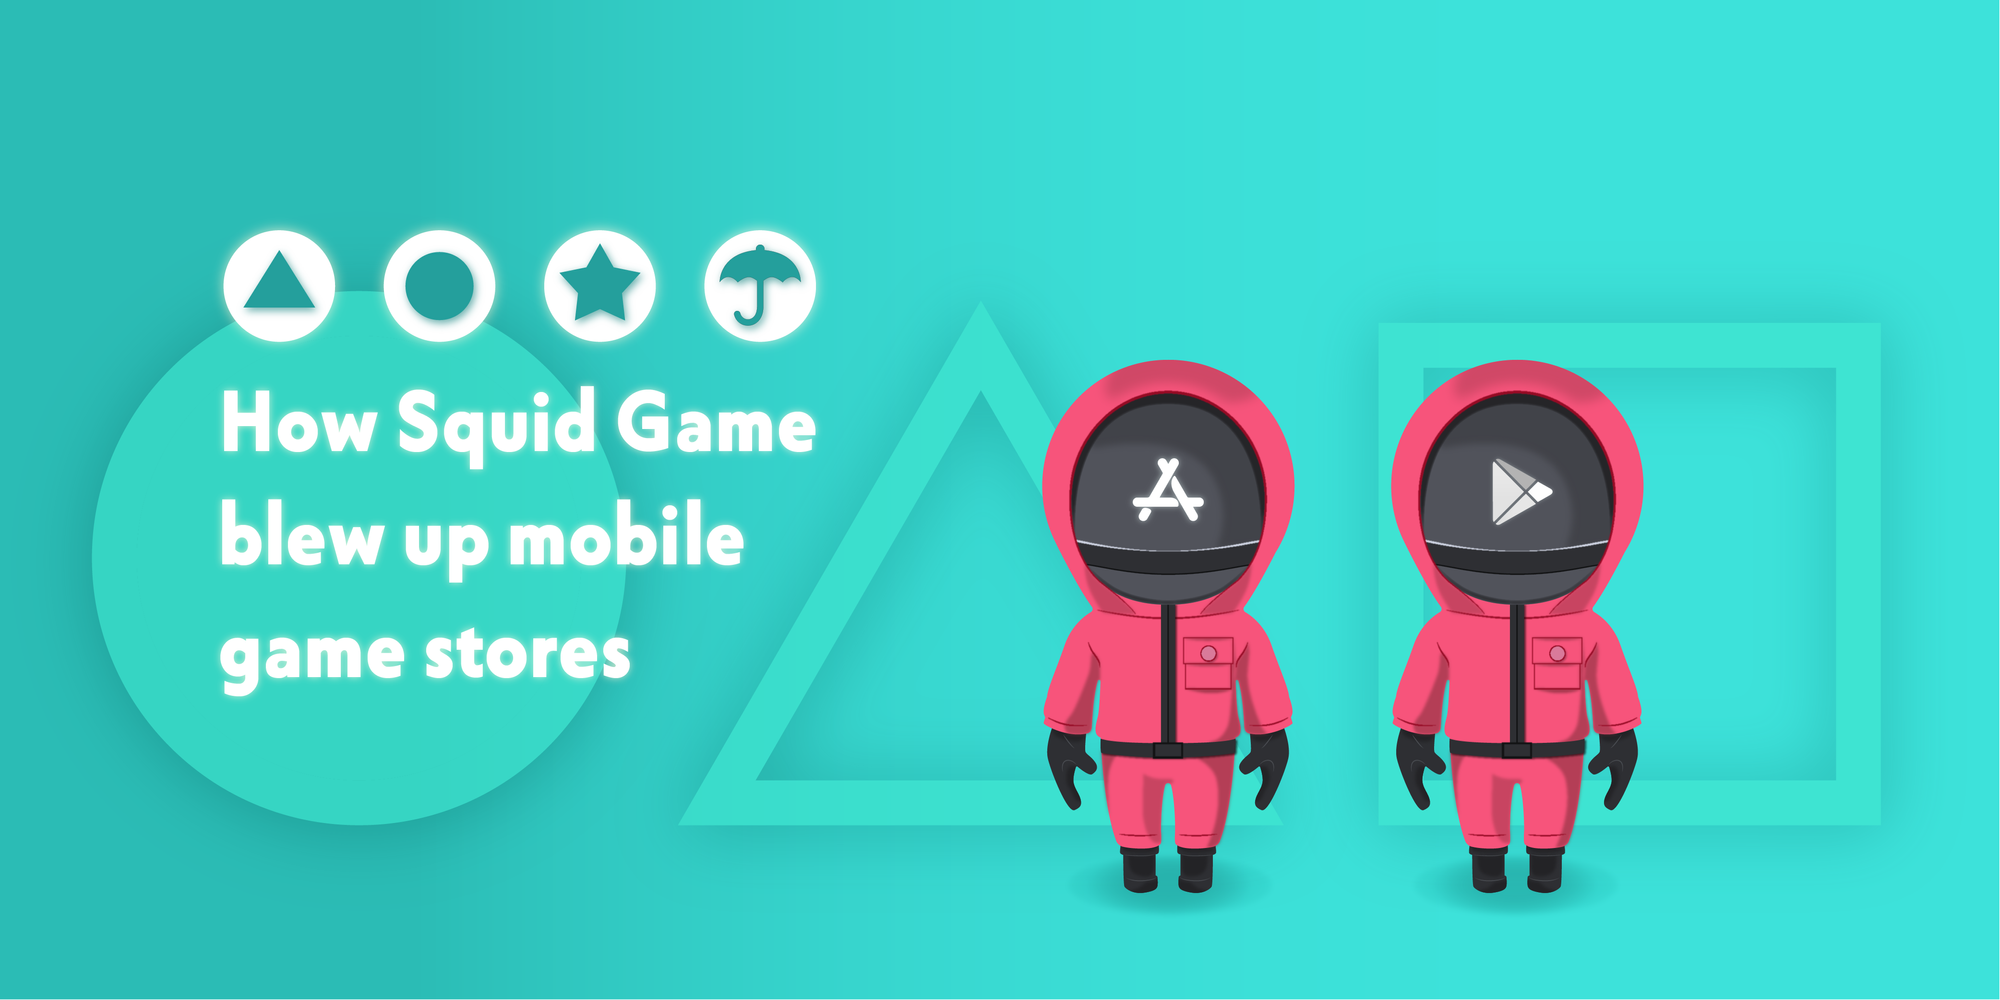 How Squid Game blew up mobile game stores: the numbers, plots and leaders